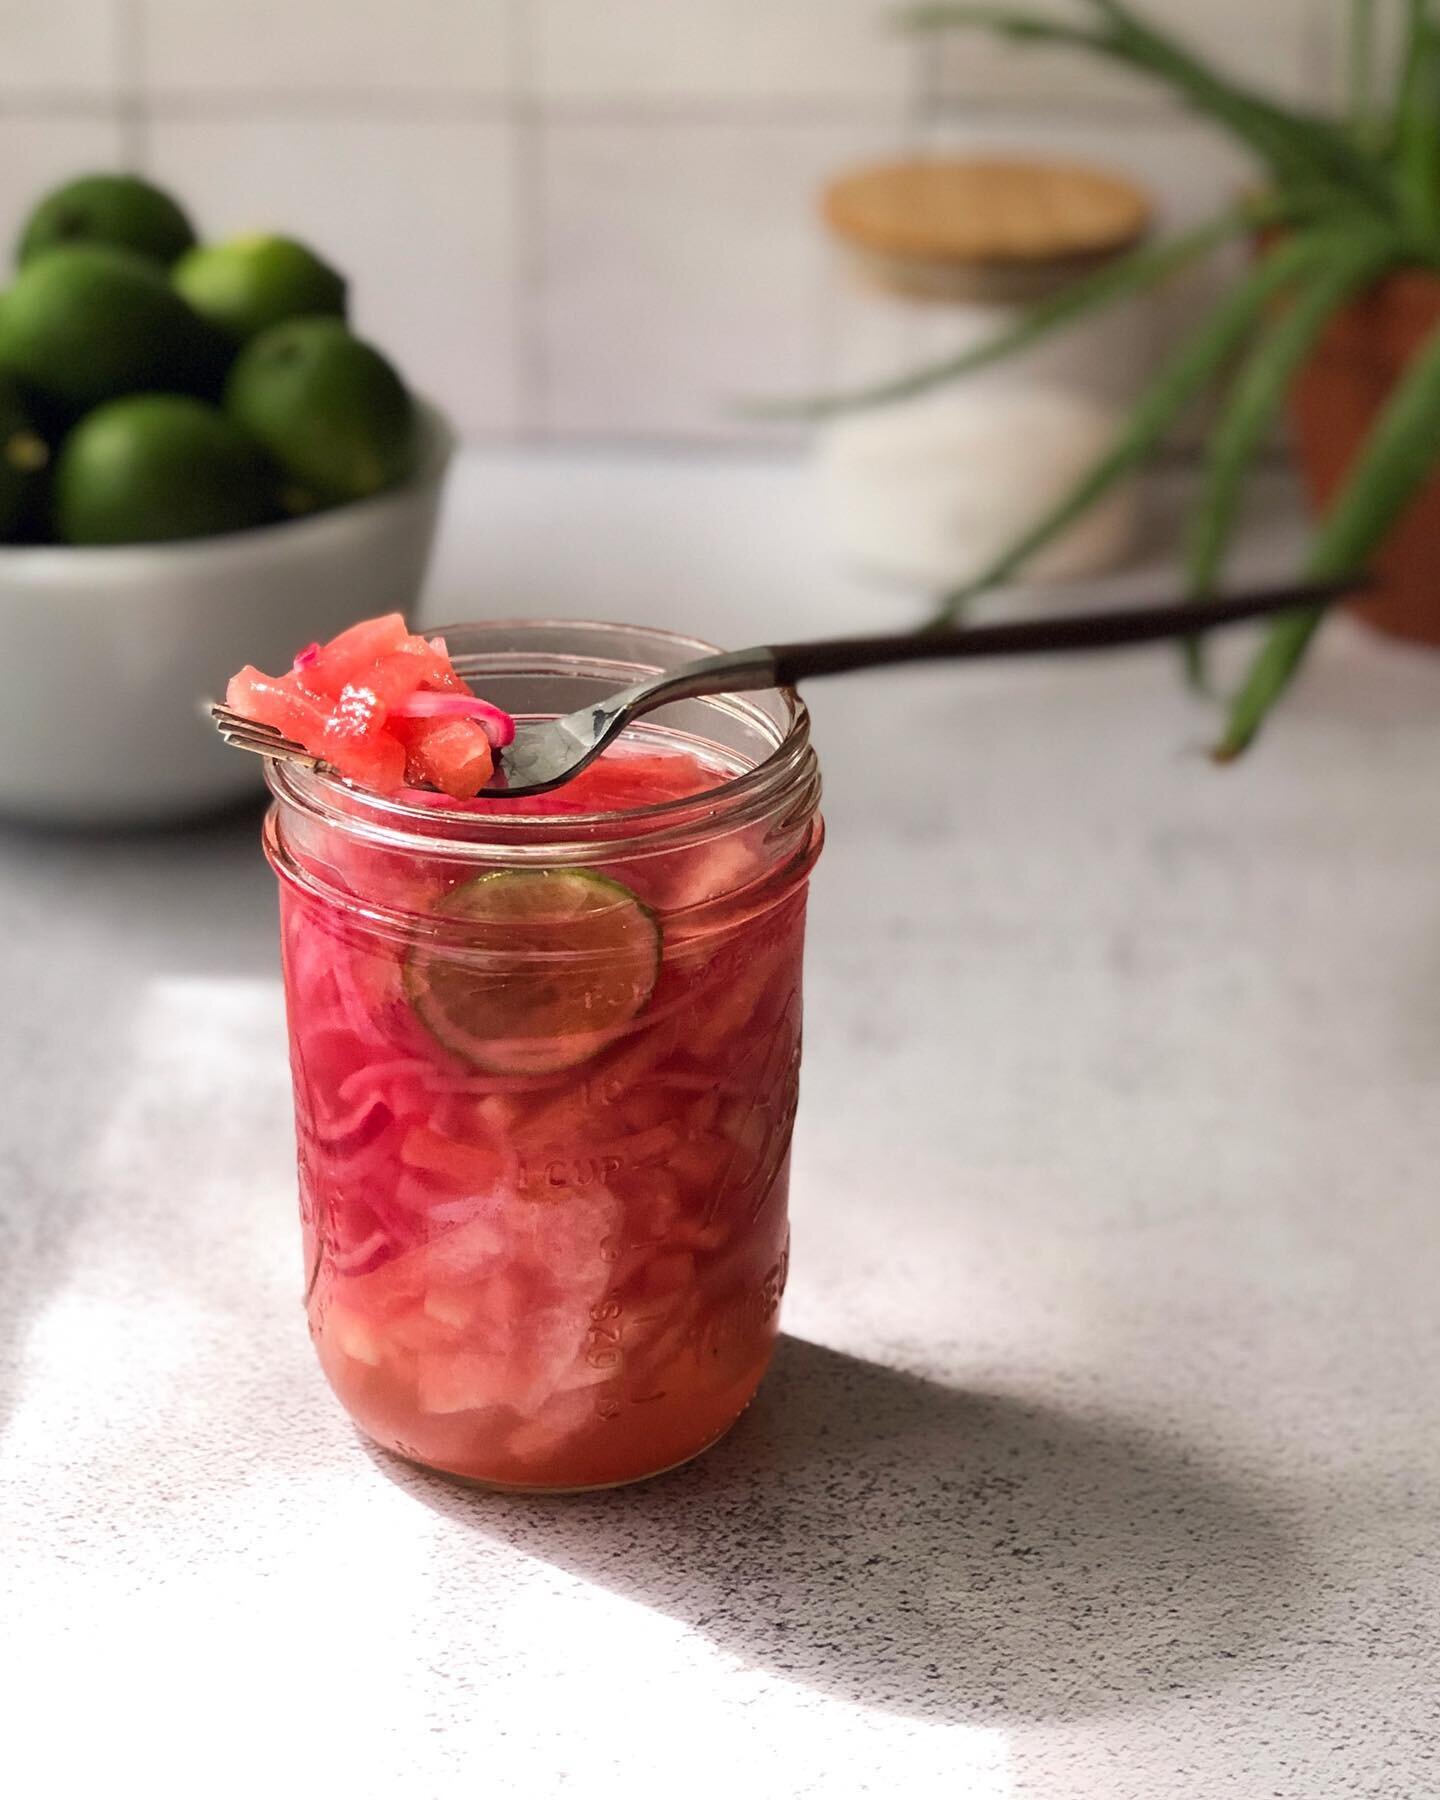 Quick pickles are one of the best flavor tools to keep on hand. They brighten up any dish - eggs, tacos, toast, salads, chili, sandwiches, pretty much anything that goes with vinegar. And, they&rsquo;re so easy to make! (You don&rsquo;t really even n